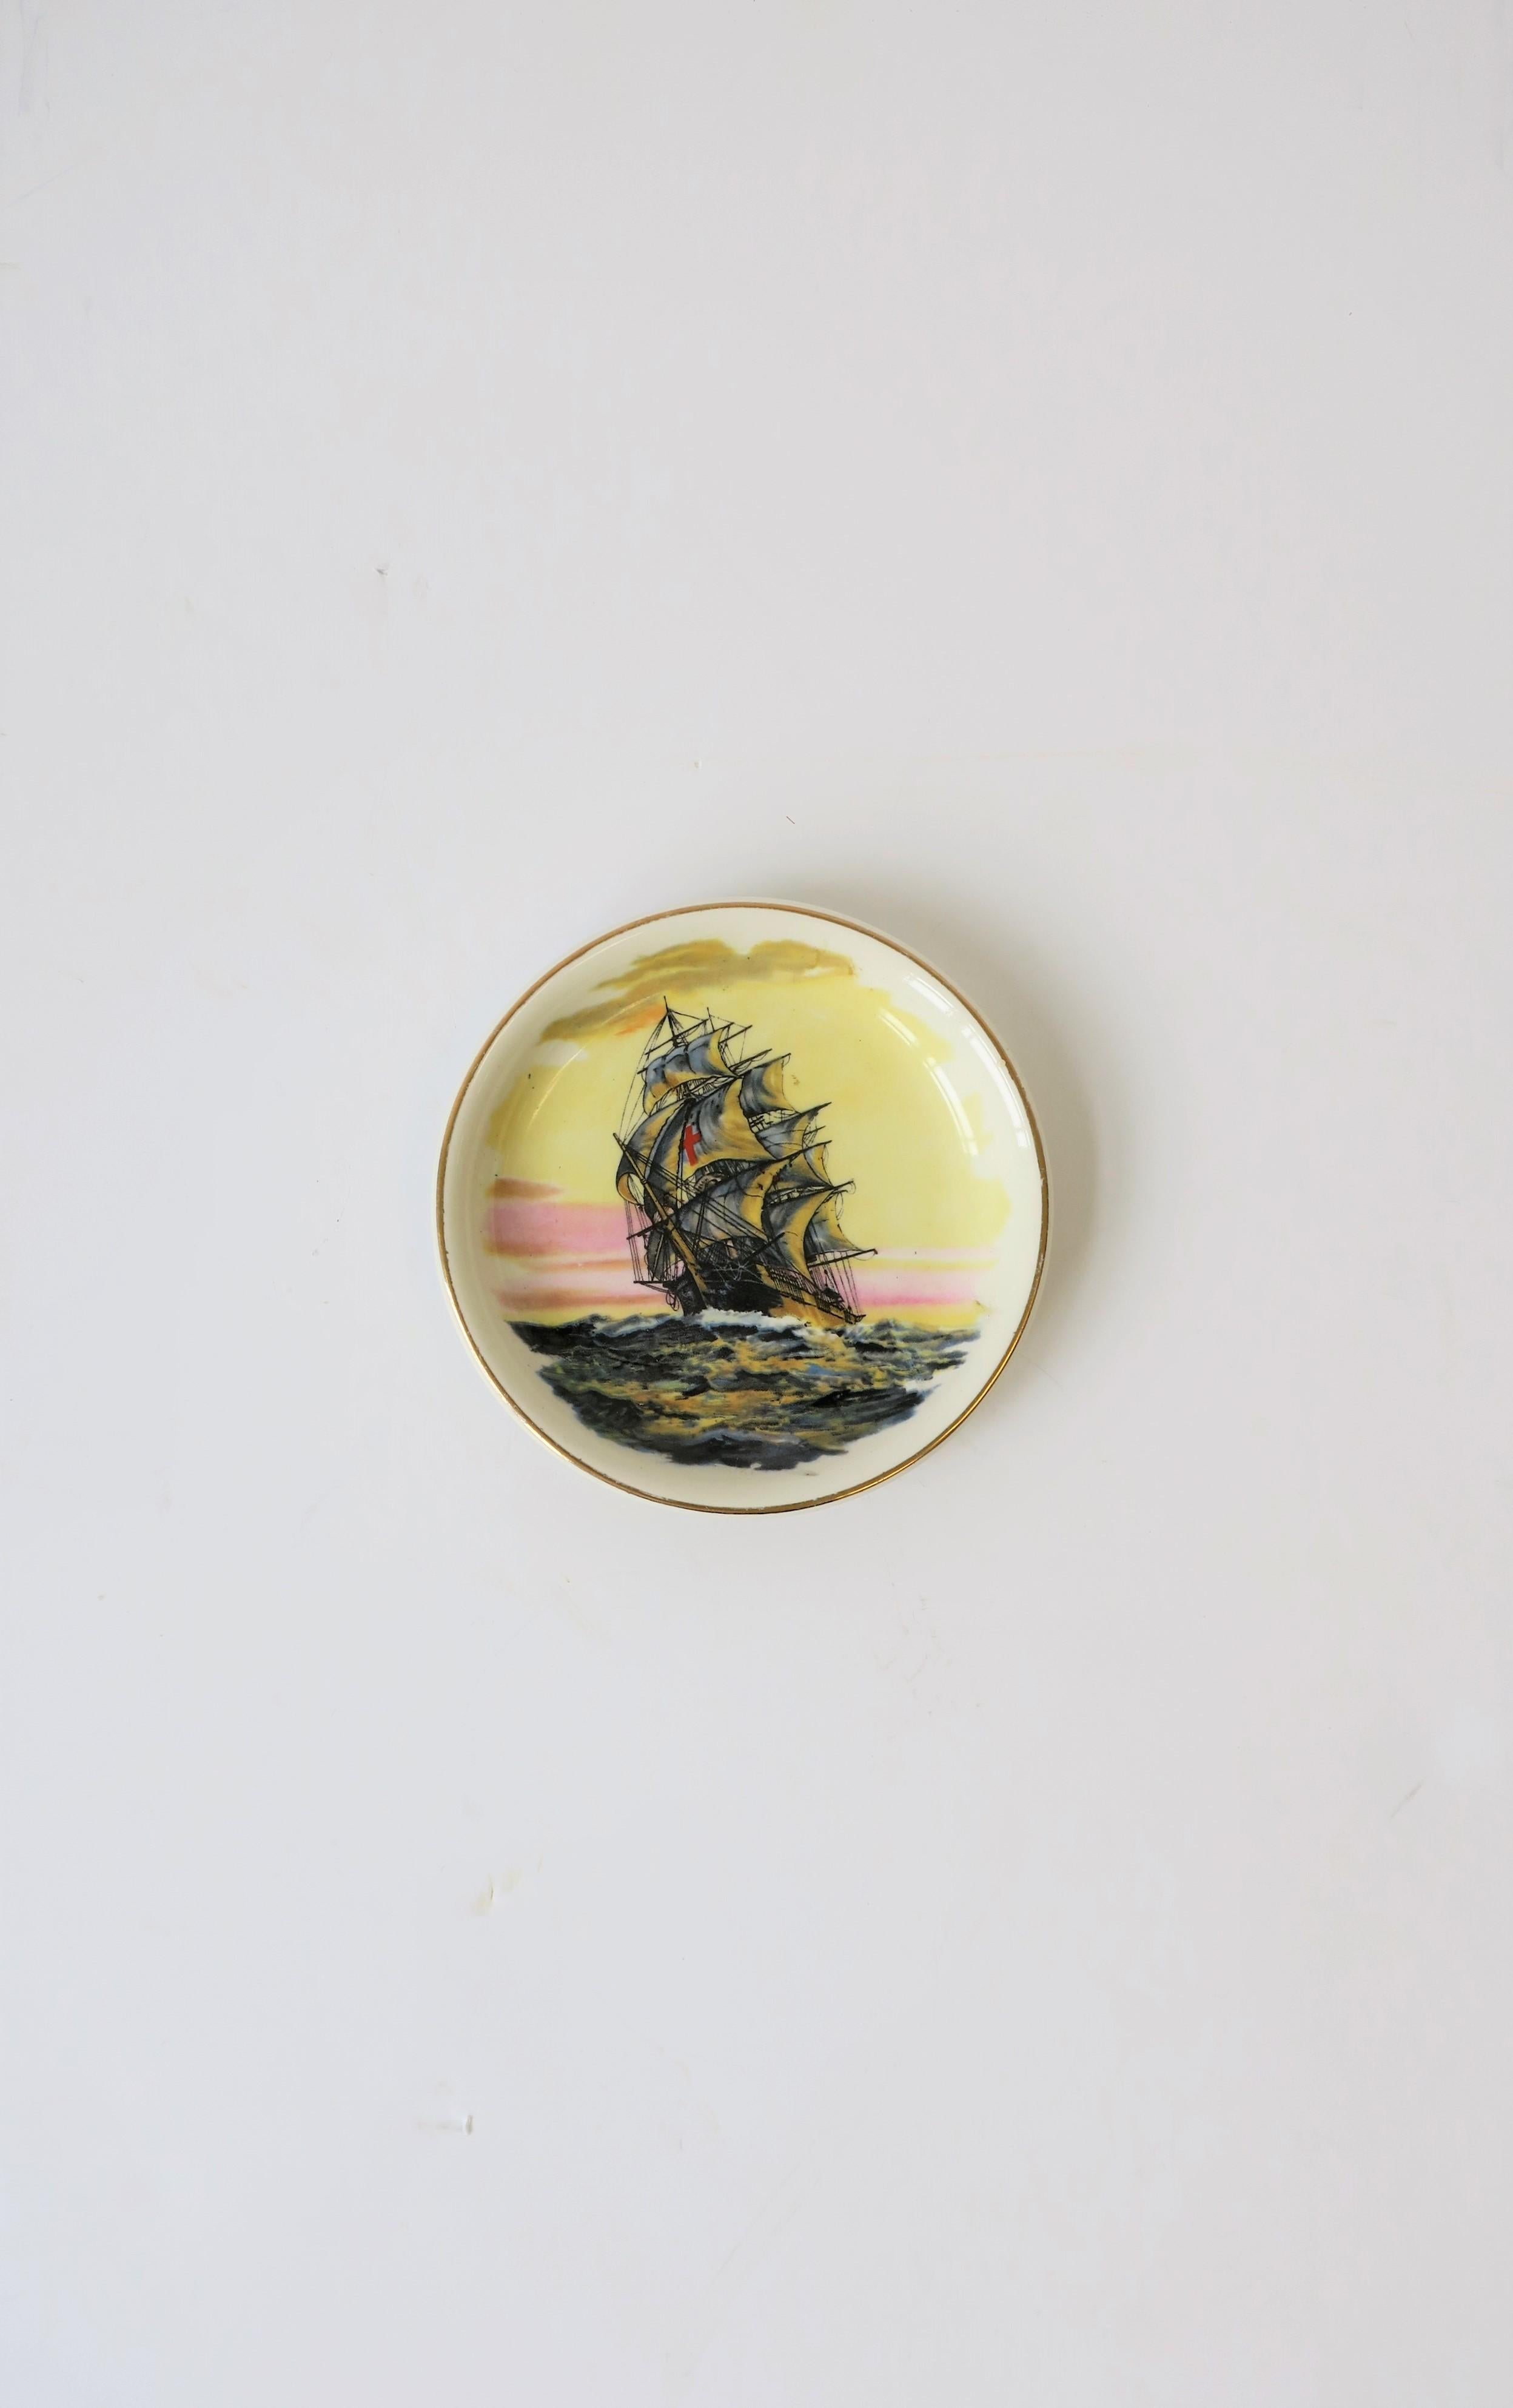 A small round English jewelry or trinket dish with a nautical 'Red Cross' clipper ship design, circa 20th century, England. With makers mark on bottom as show in image #8. A beautiful maritime scene with a 'Red Cross' ship at sea, with detailed